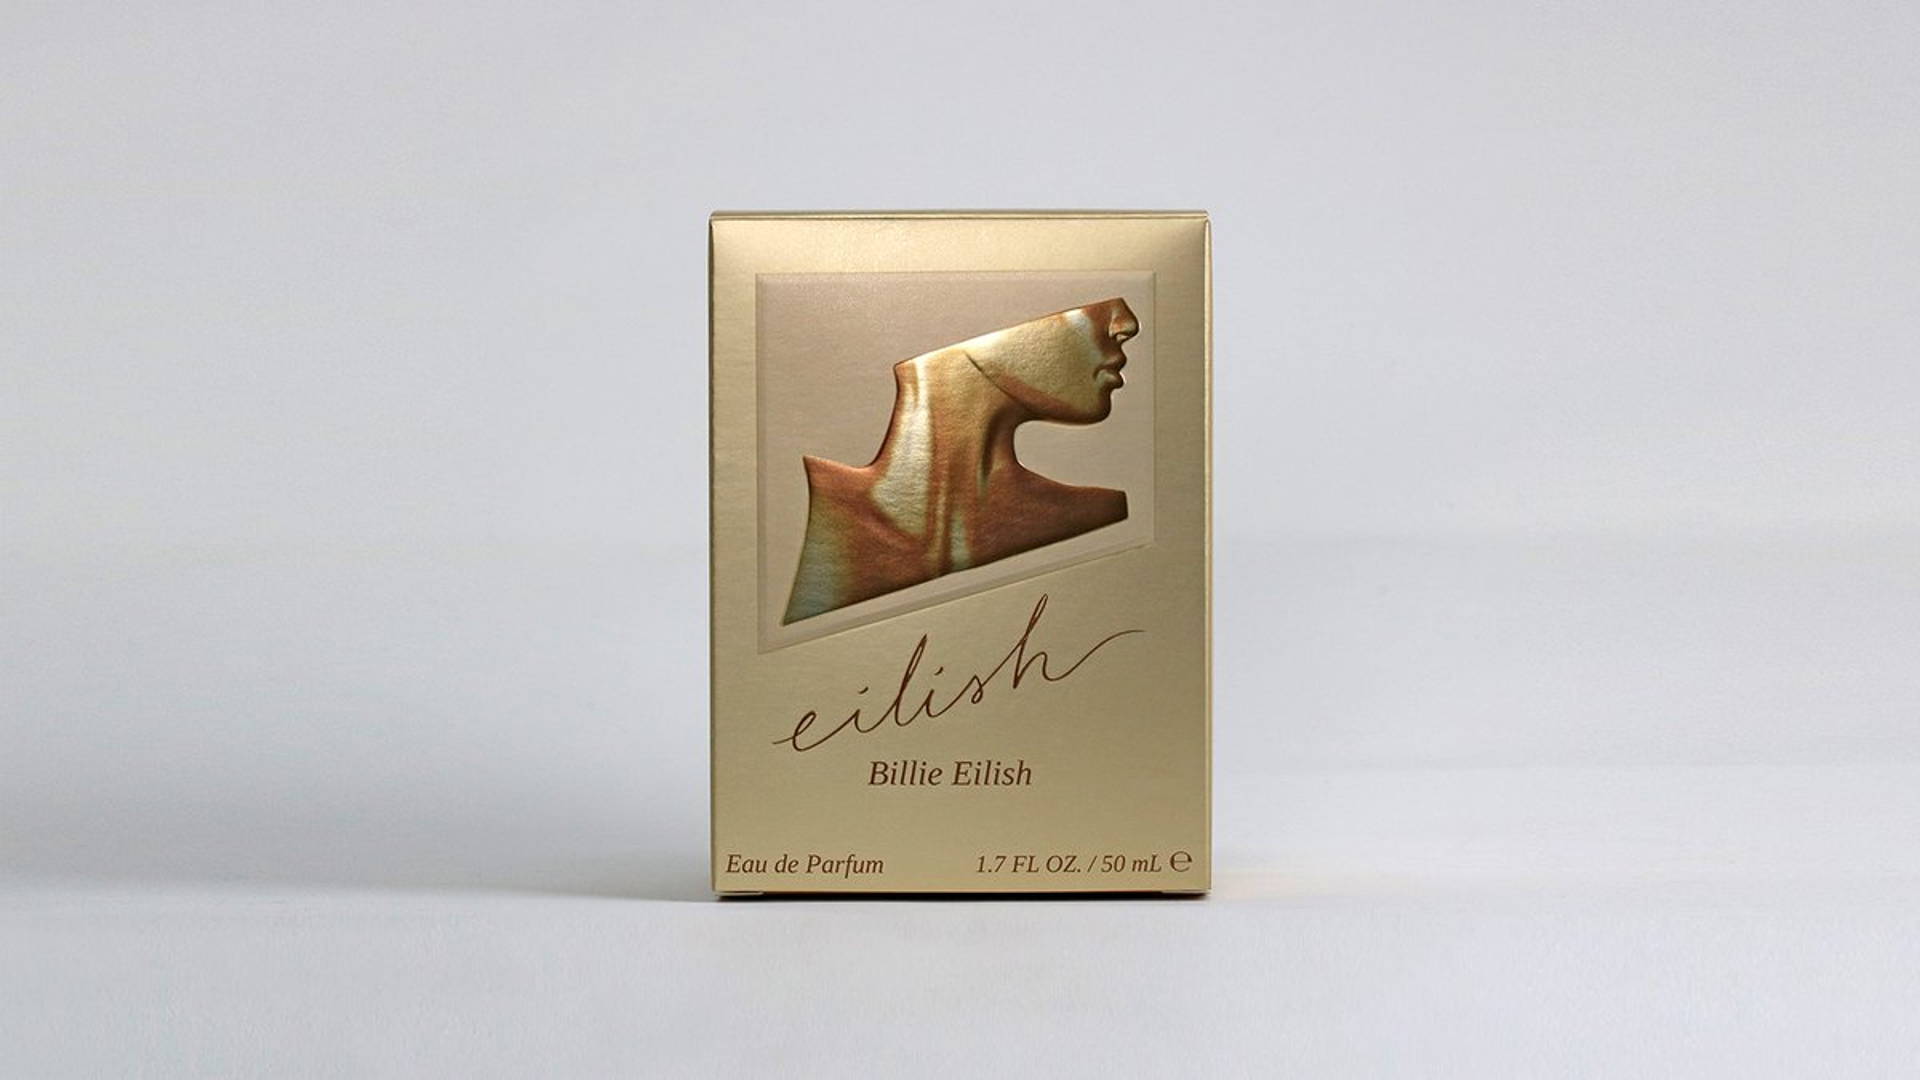 Featured image for Fragrance 'Eilish By Billie Eilish' Is Packaged In Urbane, Sustainably-Minded Boxes